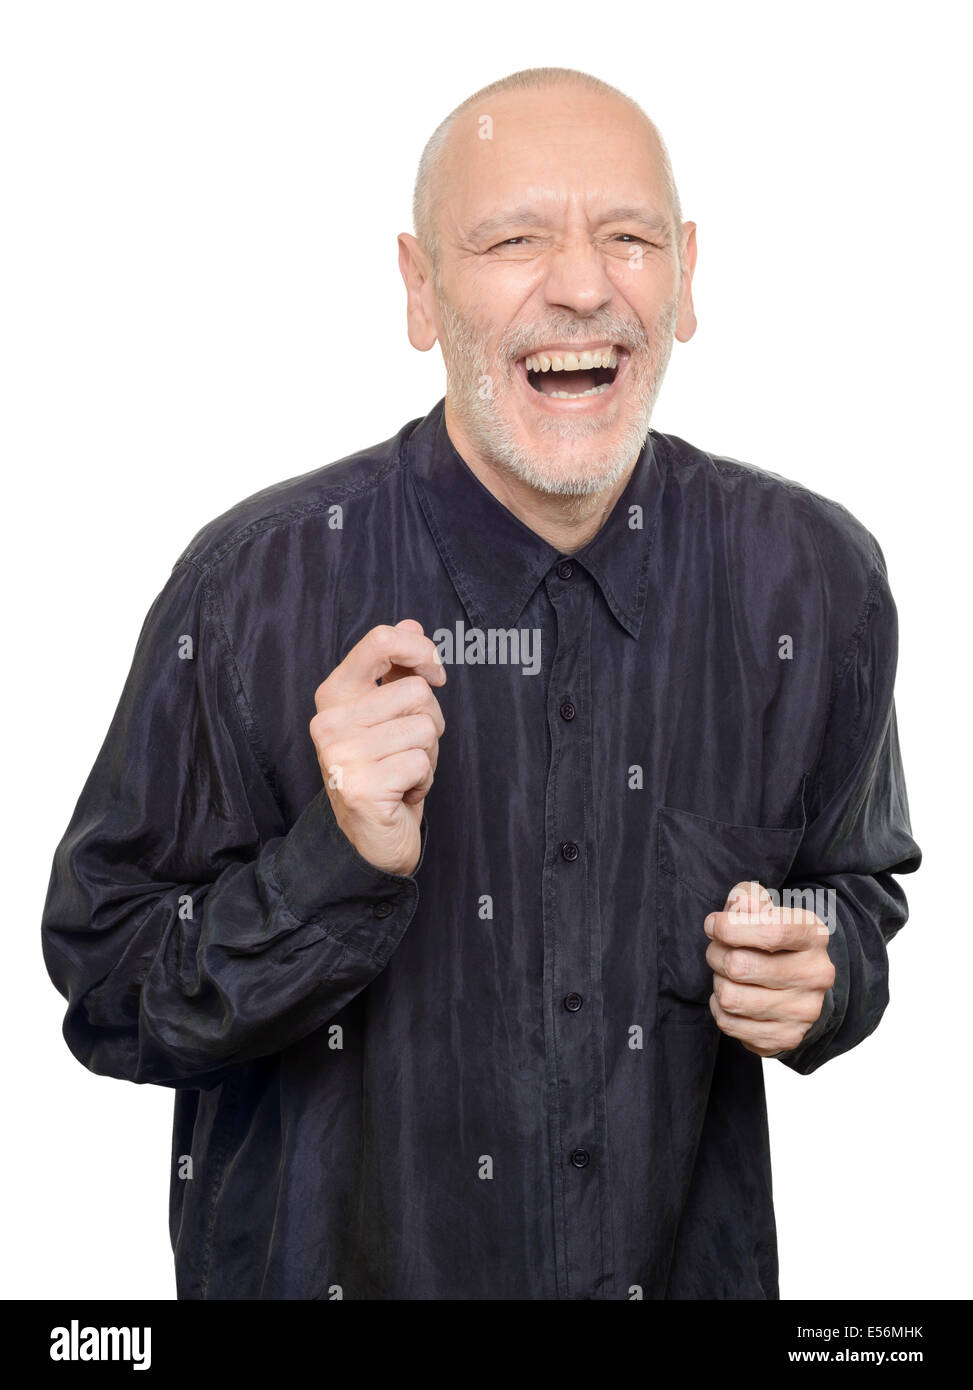 Man with black silk shirt laughing out loud, isolated on white background Stock Photo